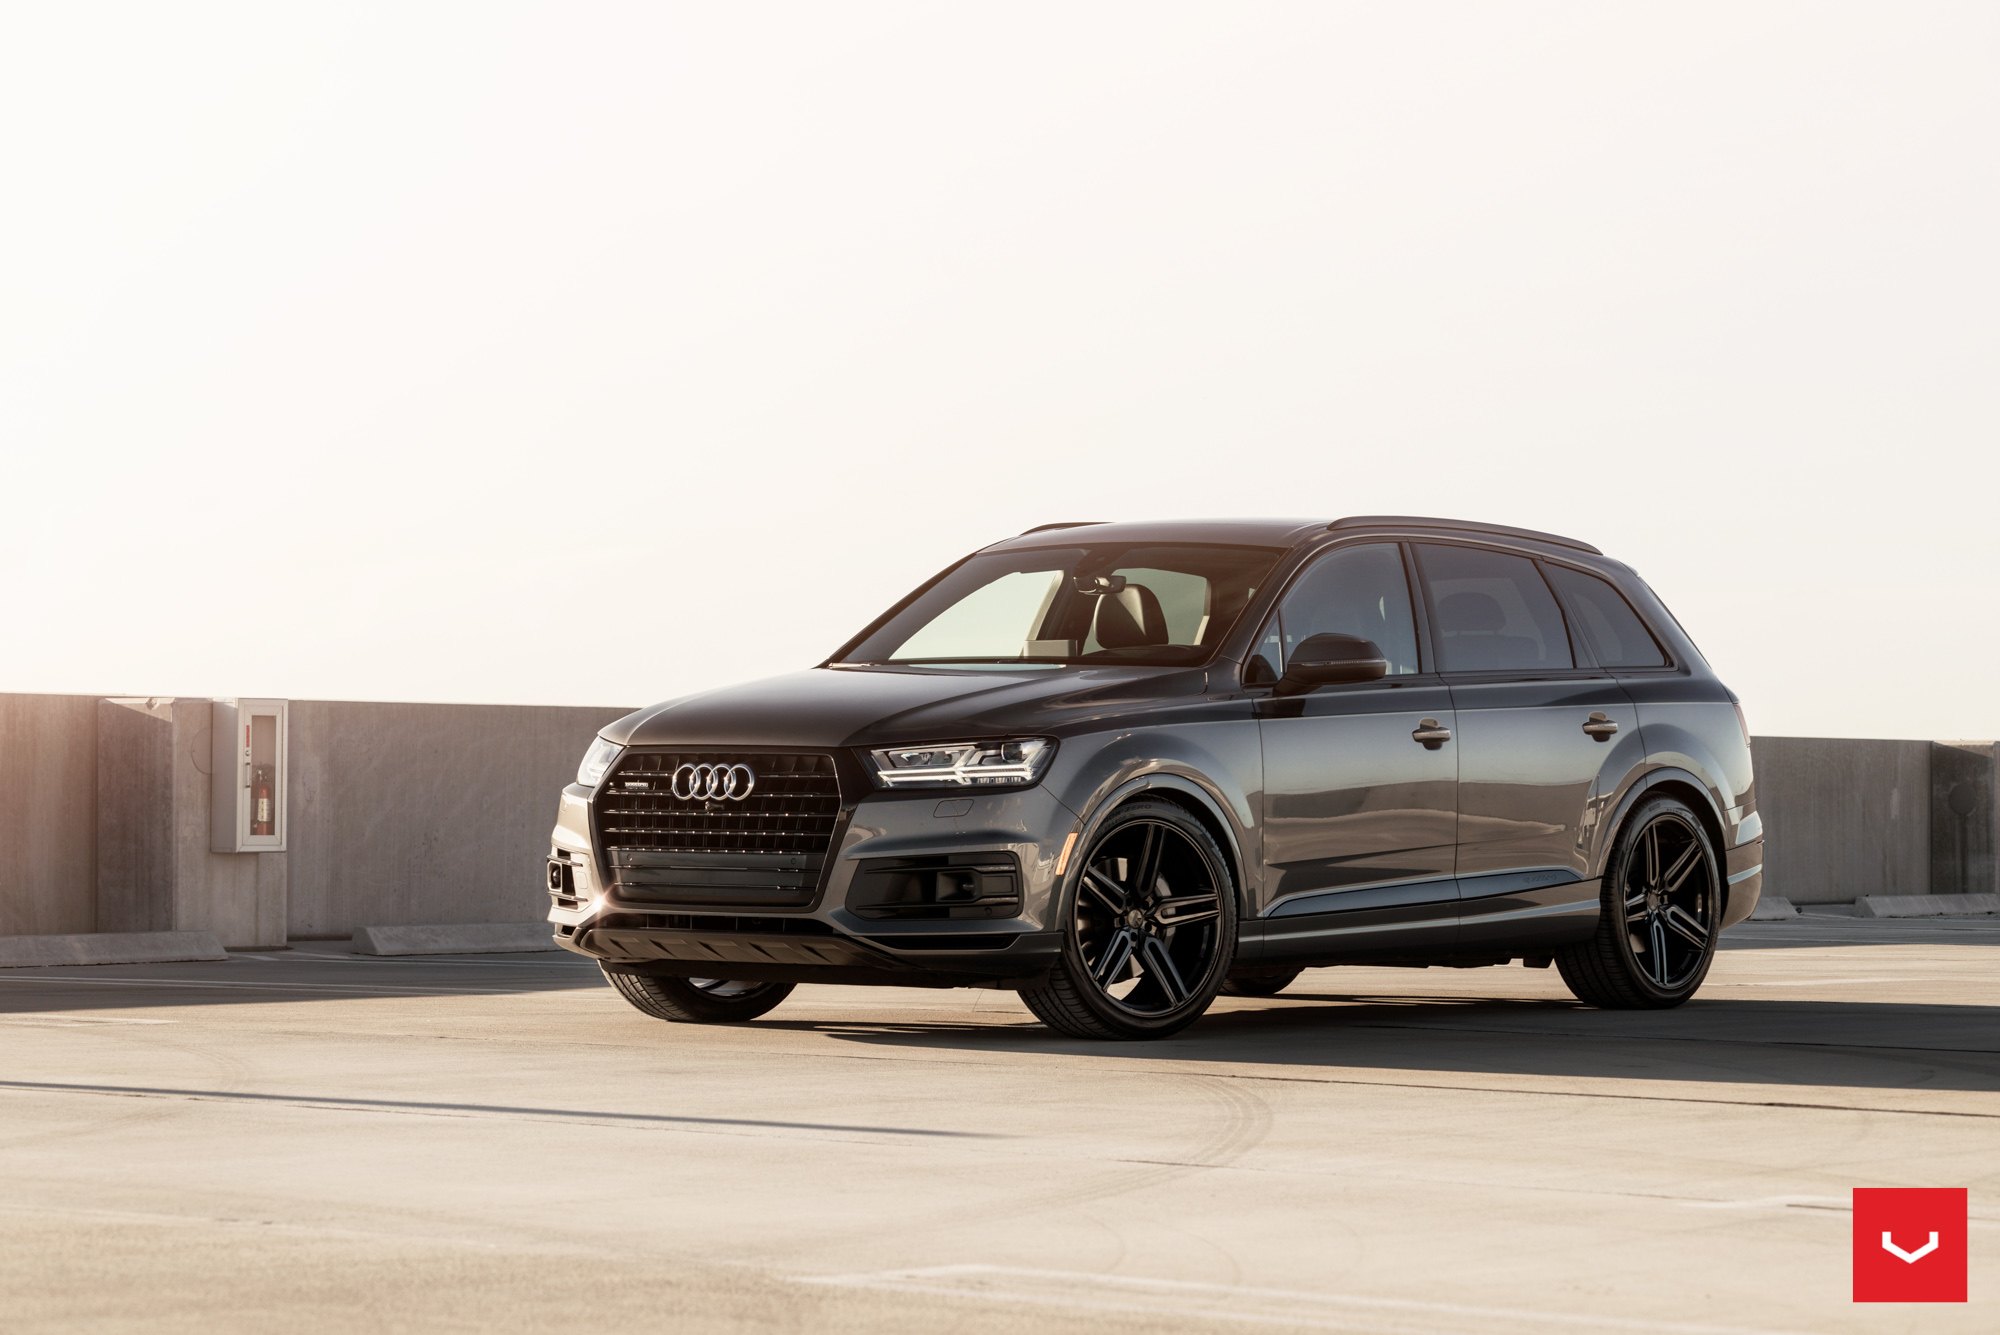 Aftermarket Bumper Guard on Gray Audi Q5 - Photo by Vossen